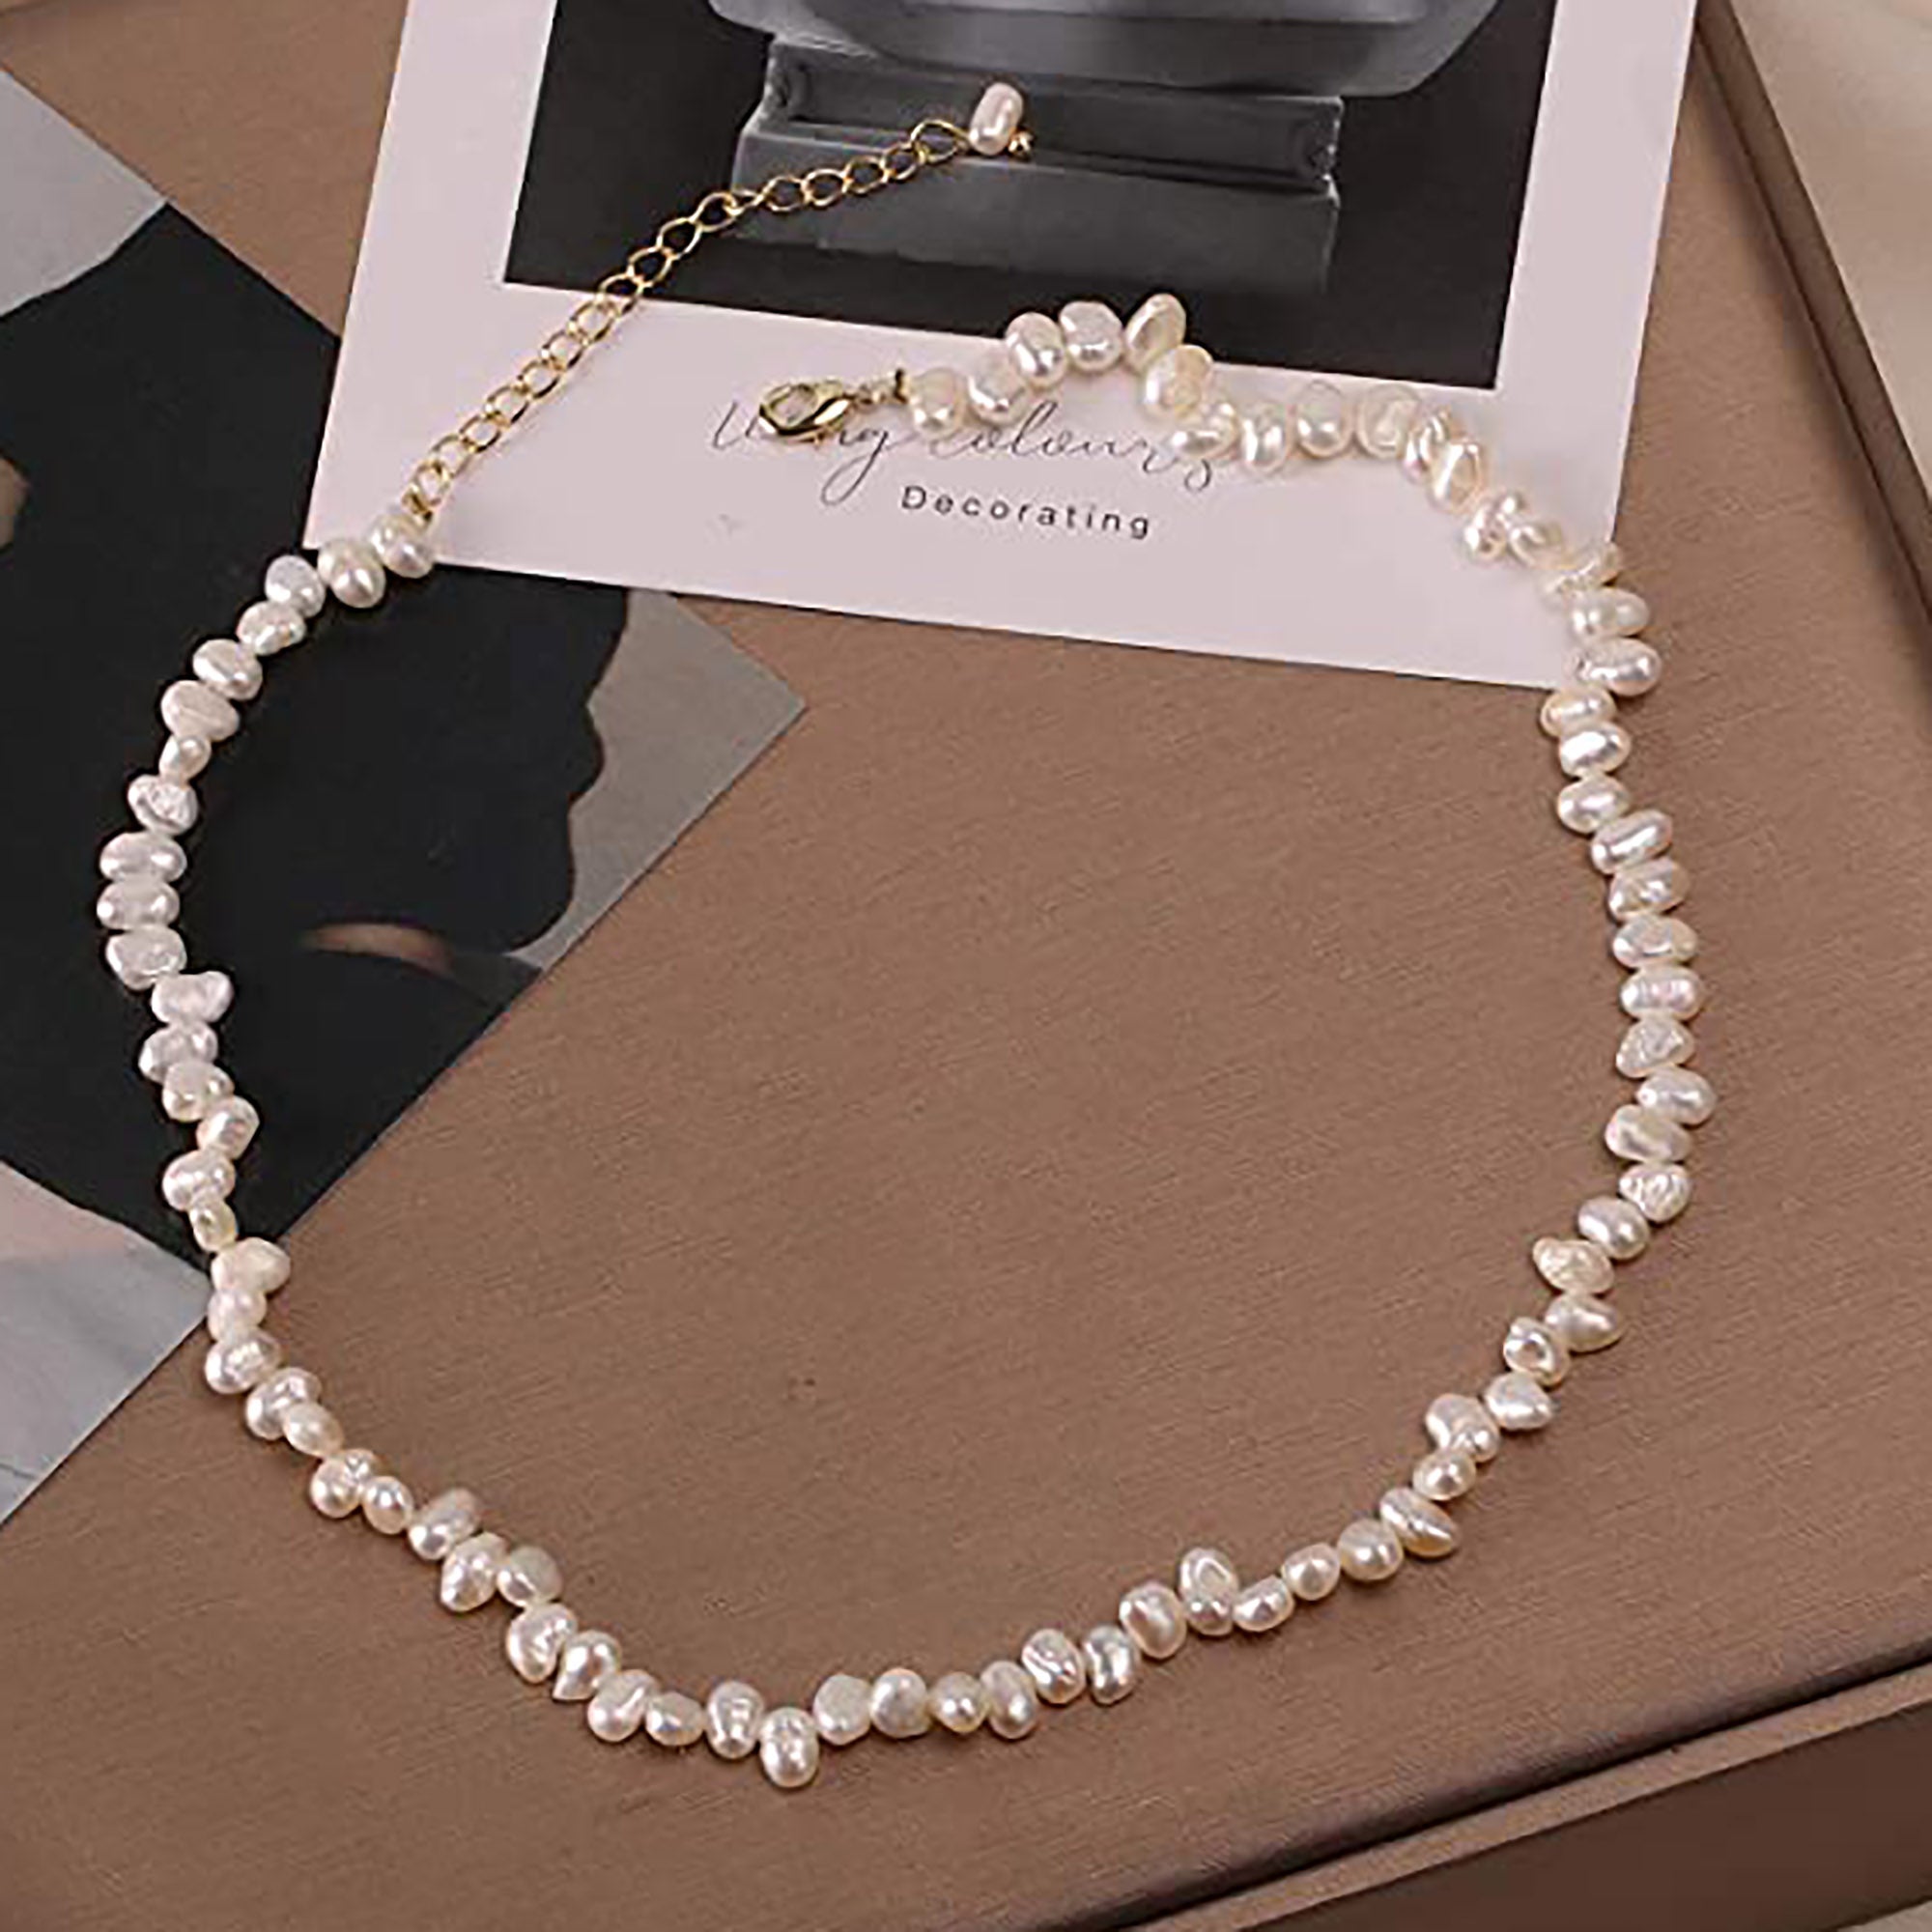 3 mm / 15.7 inches Pearl Choker Fashion Handpicked Cultured Barque Pearls Handmade Strand Chain Trendy Delicate Necklace